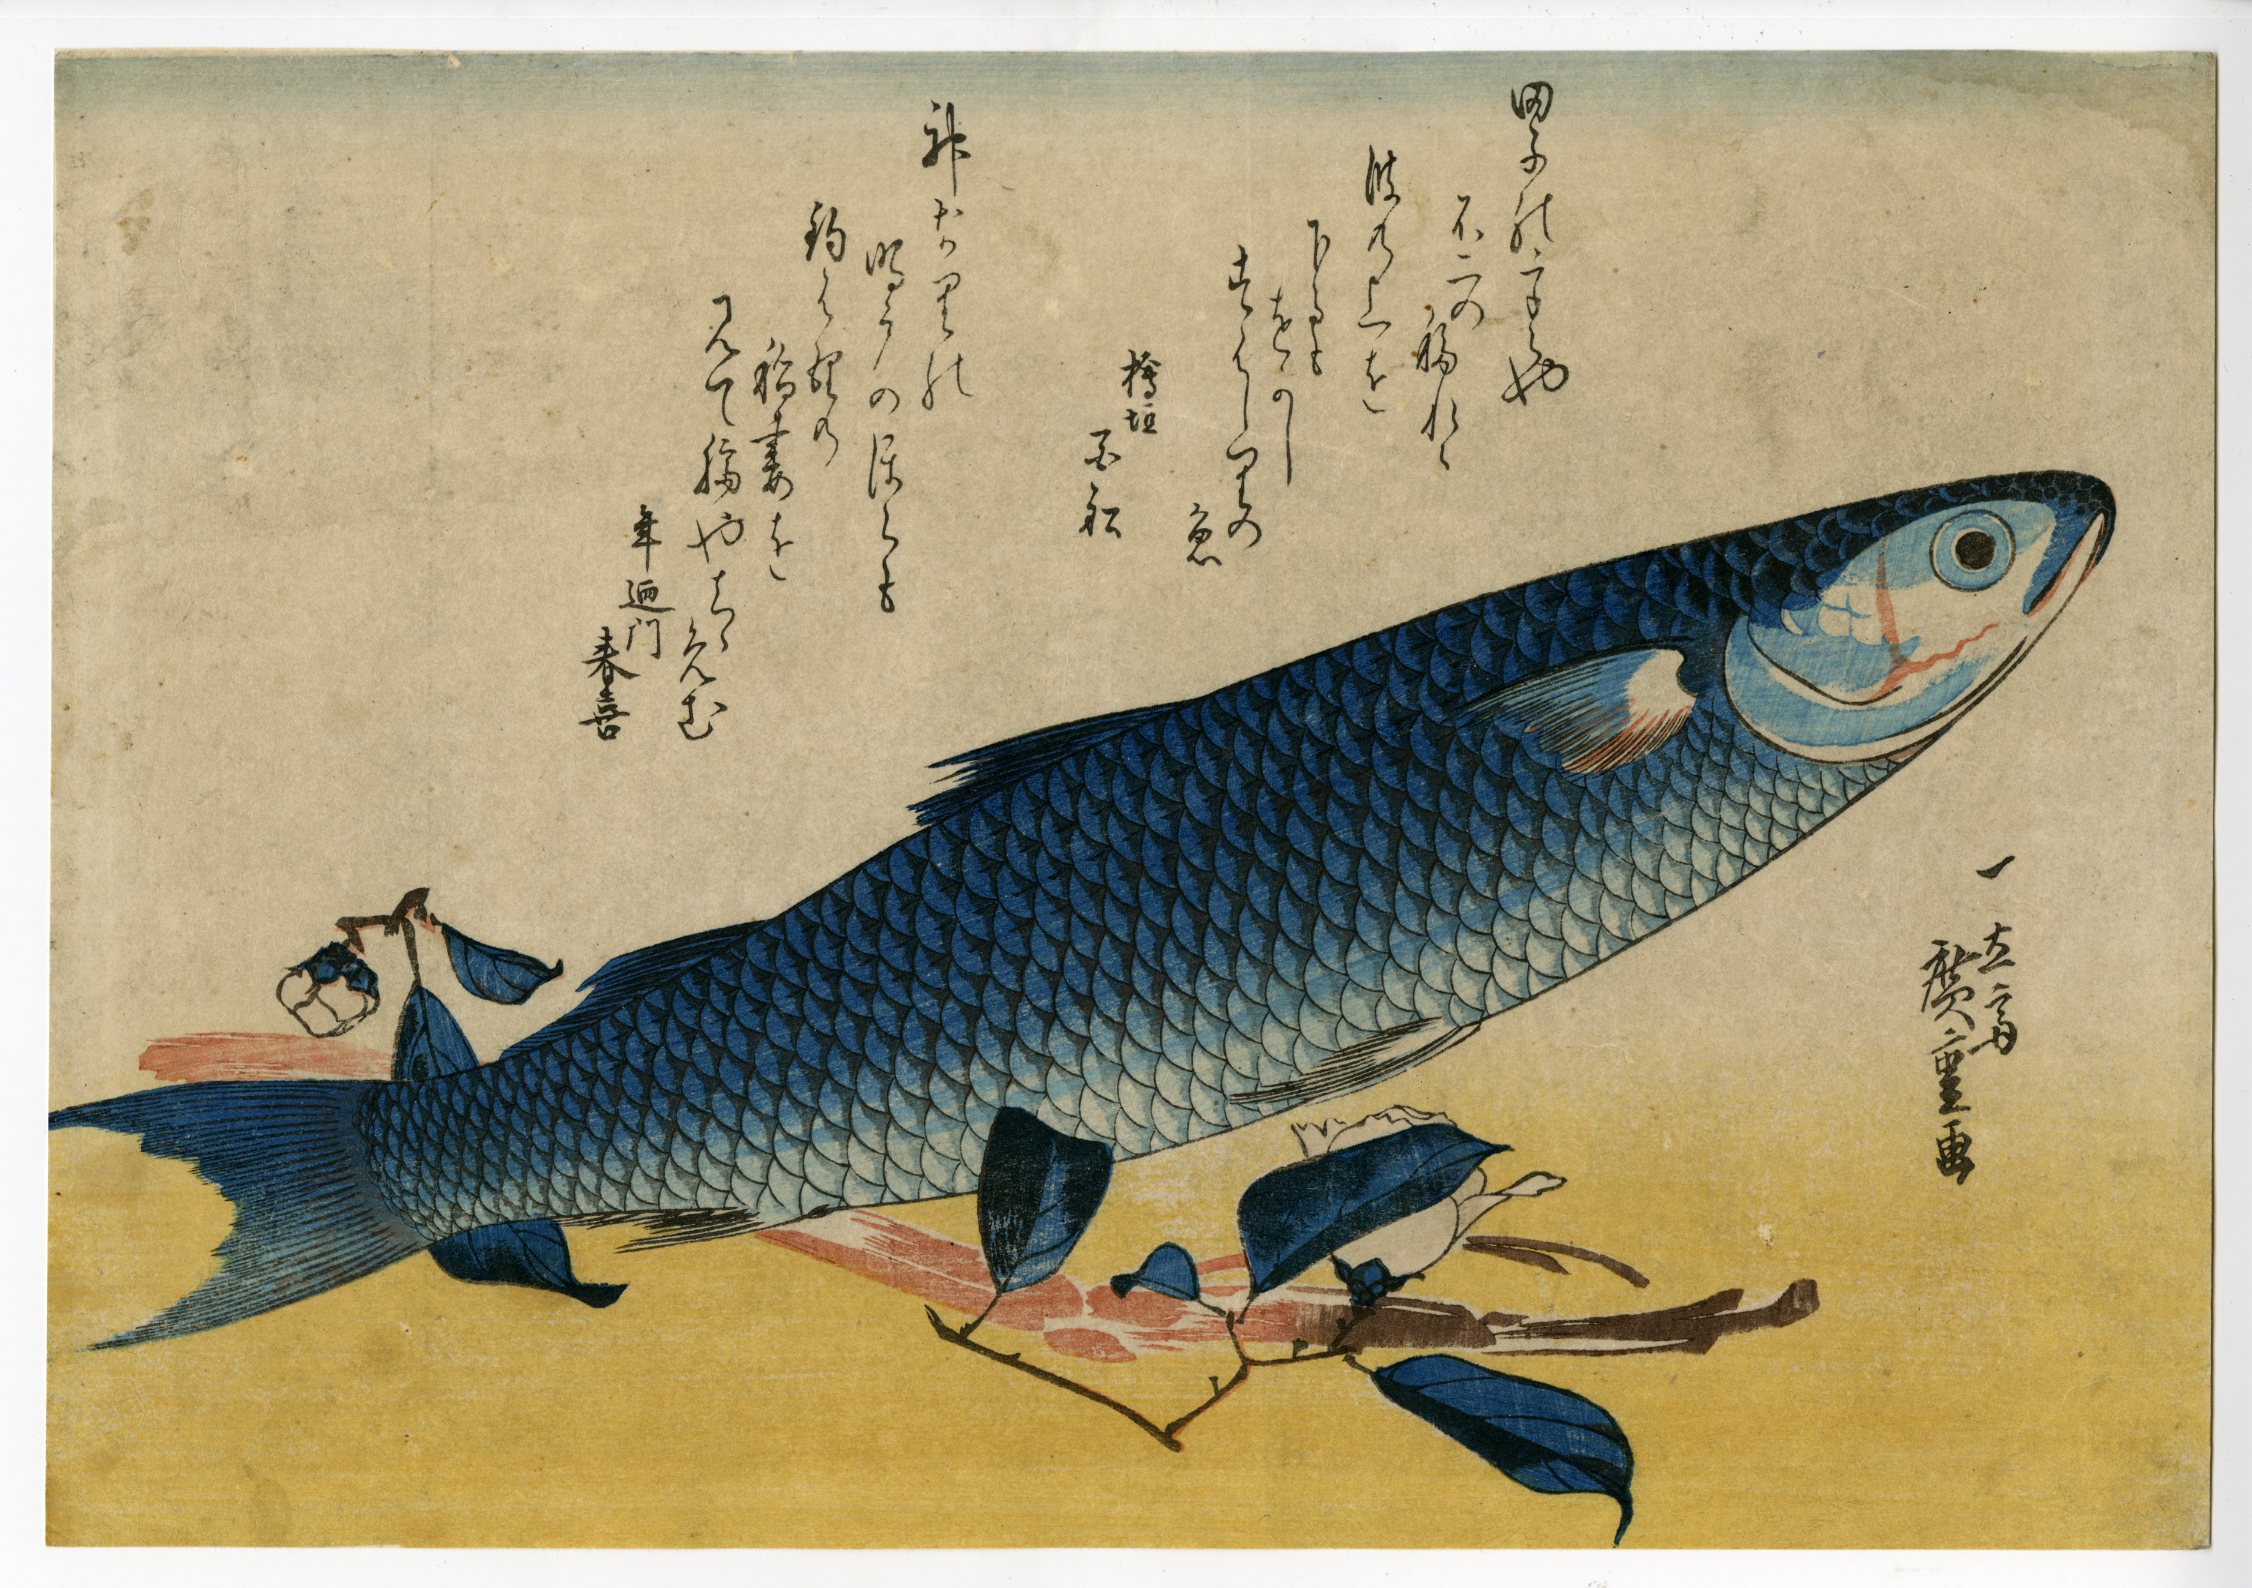 Hiroshige - Striped mullet and udo, Grand Series of Fishes - Ukiyo 